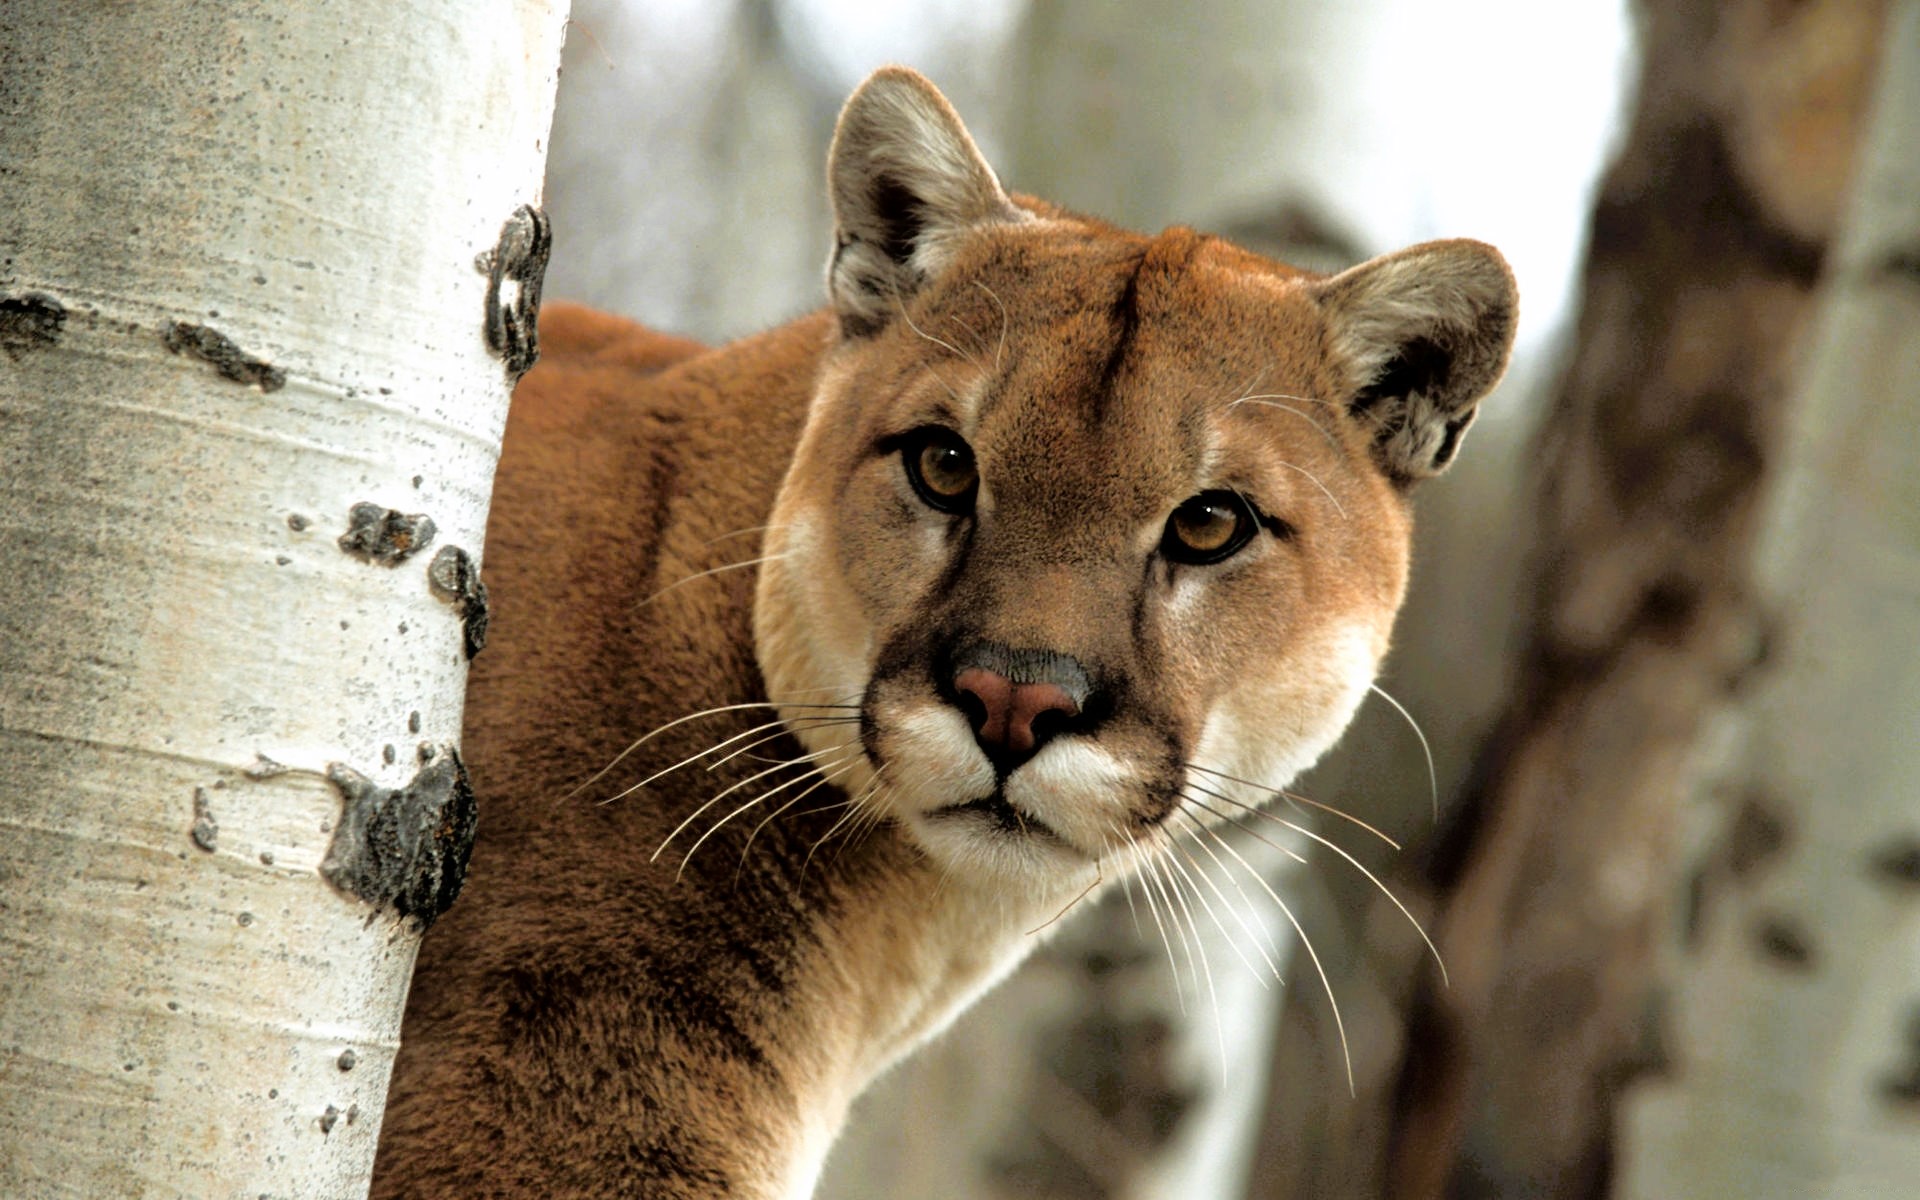 The sly face of a cougar